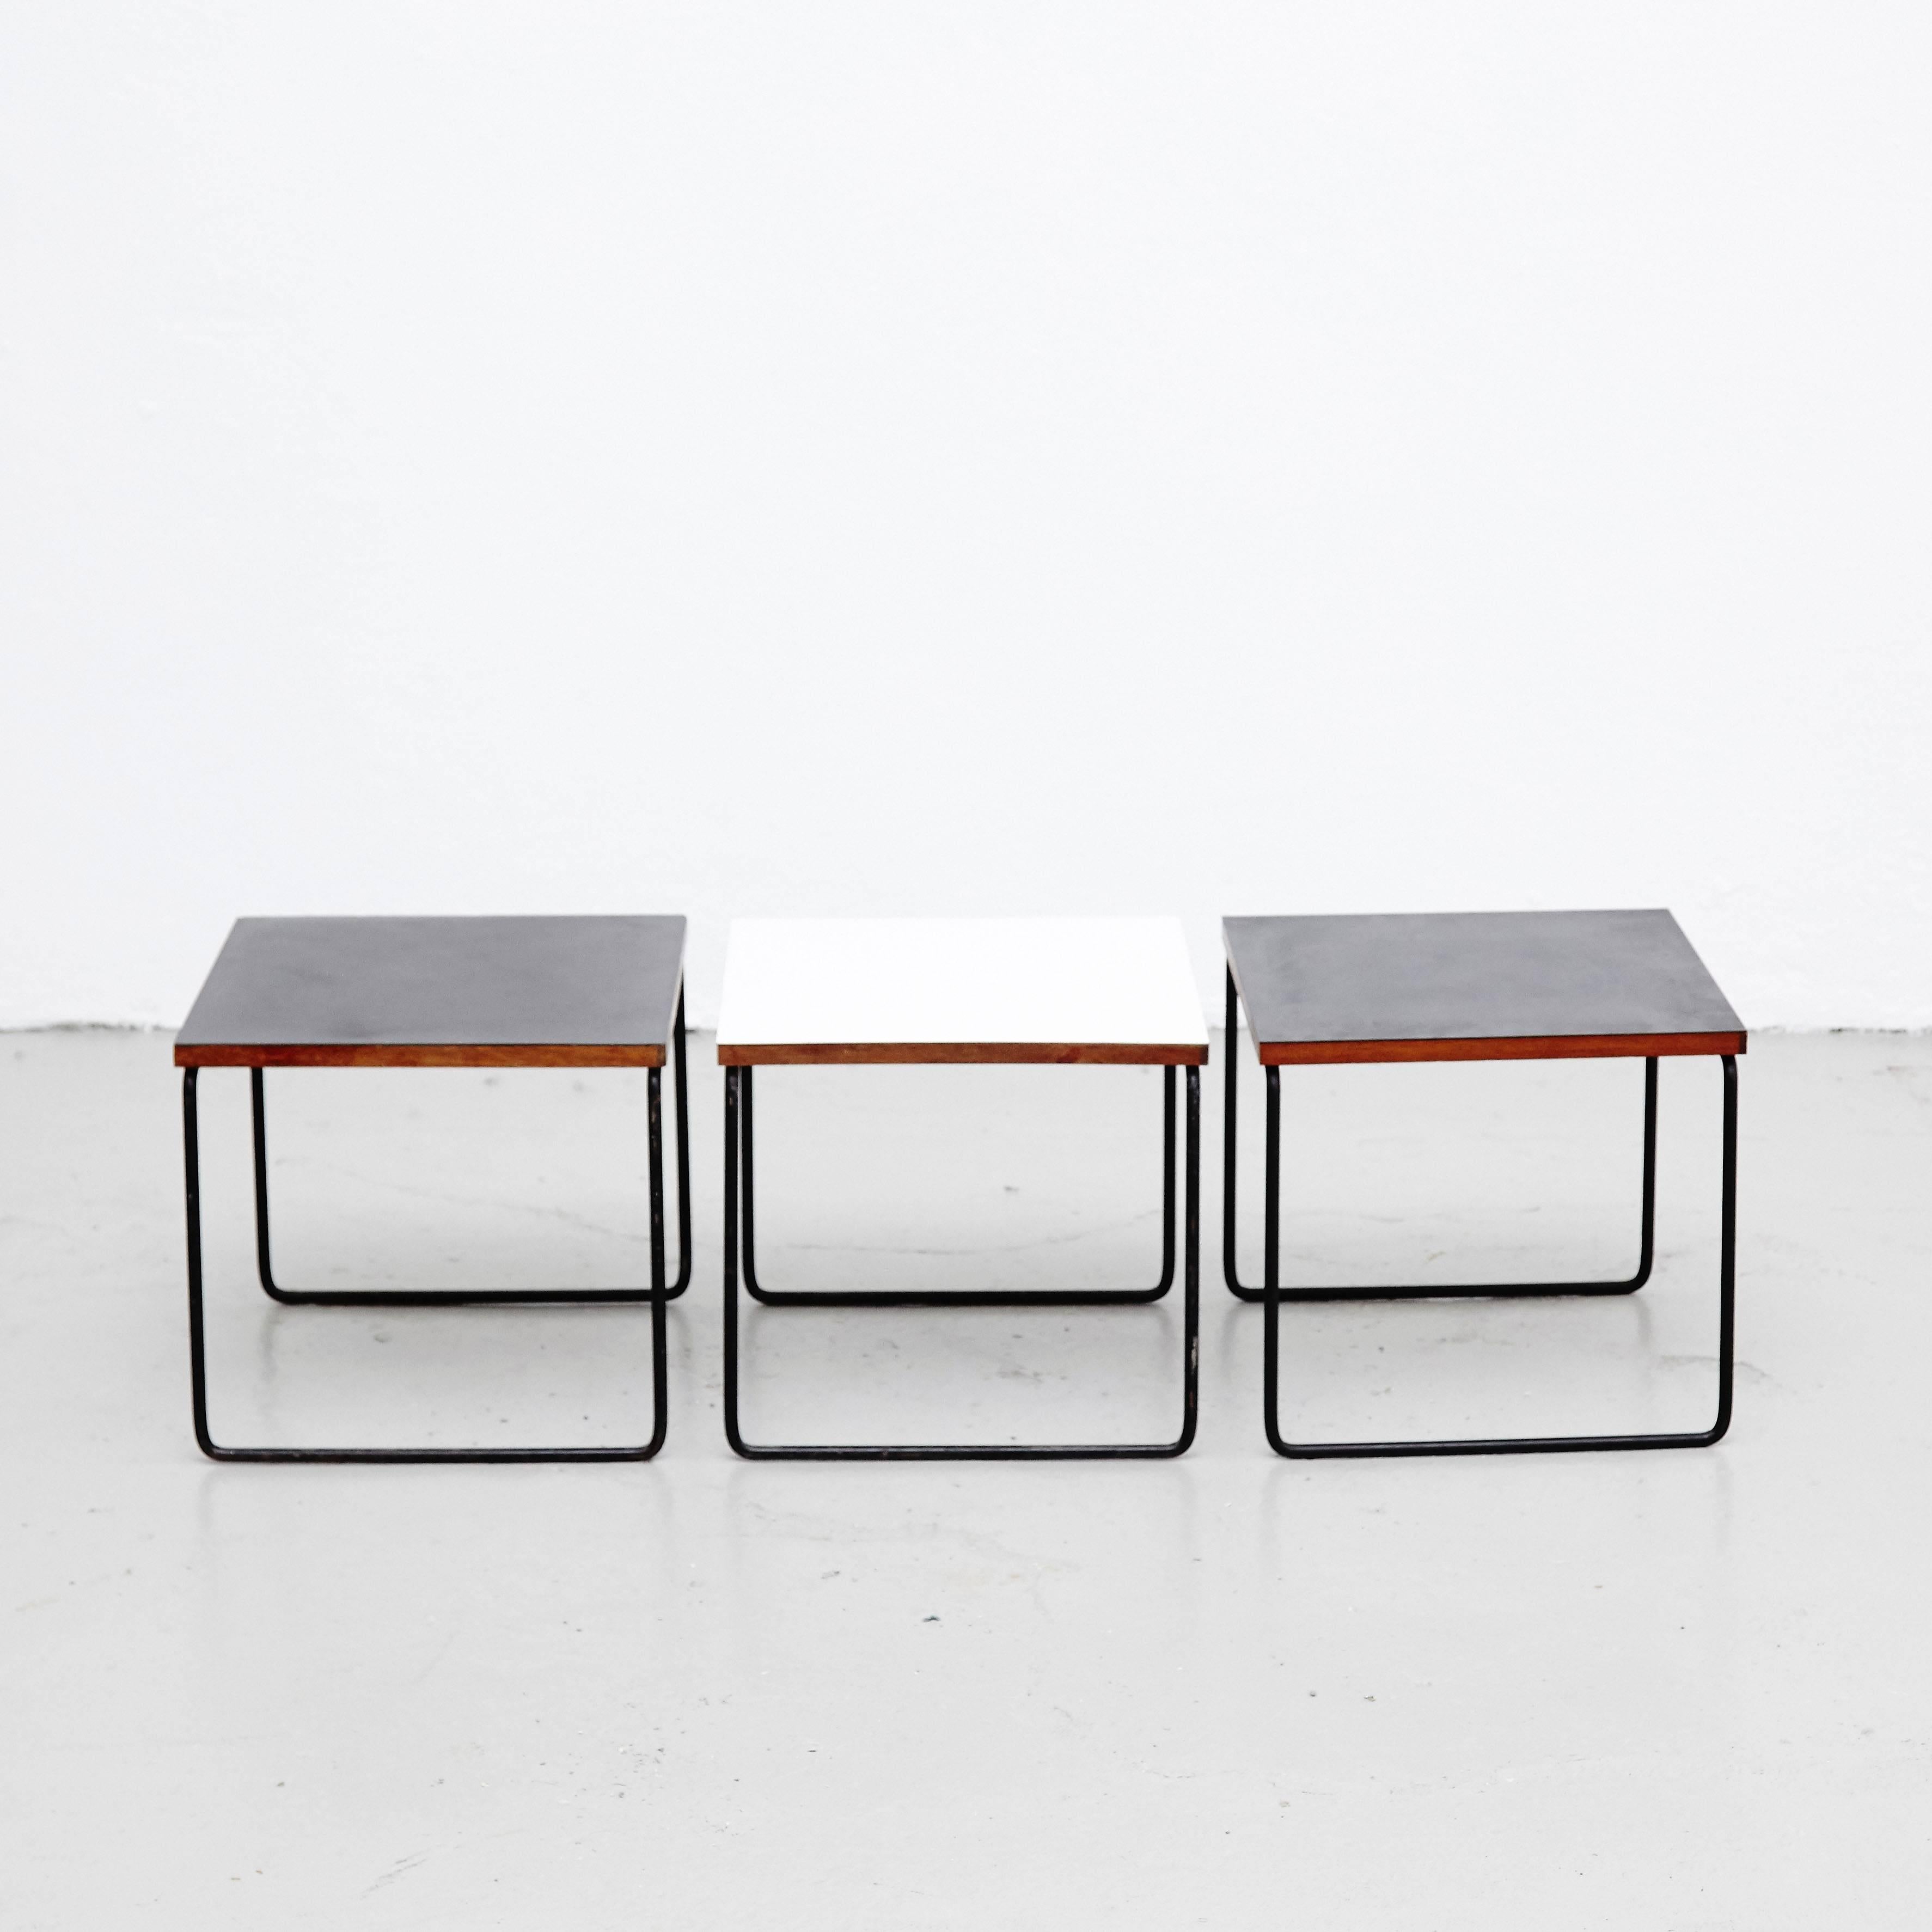 Tables designed by Pierre Guariche. 
Manufactured by Steiner, (France), circa 1950. 
Bent and painted iron frame, laminated wood. 

In good original condition, with minor wear consistent with age and use, preserving a nice patina. 

Guariche